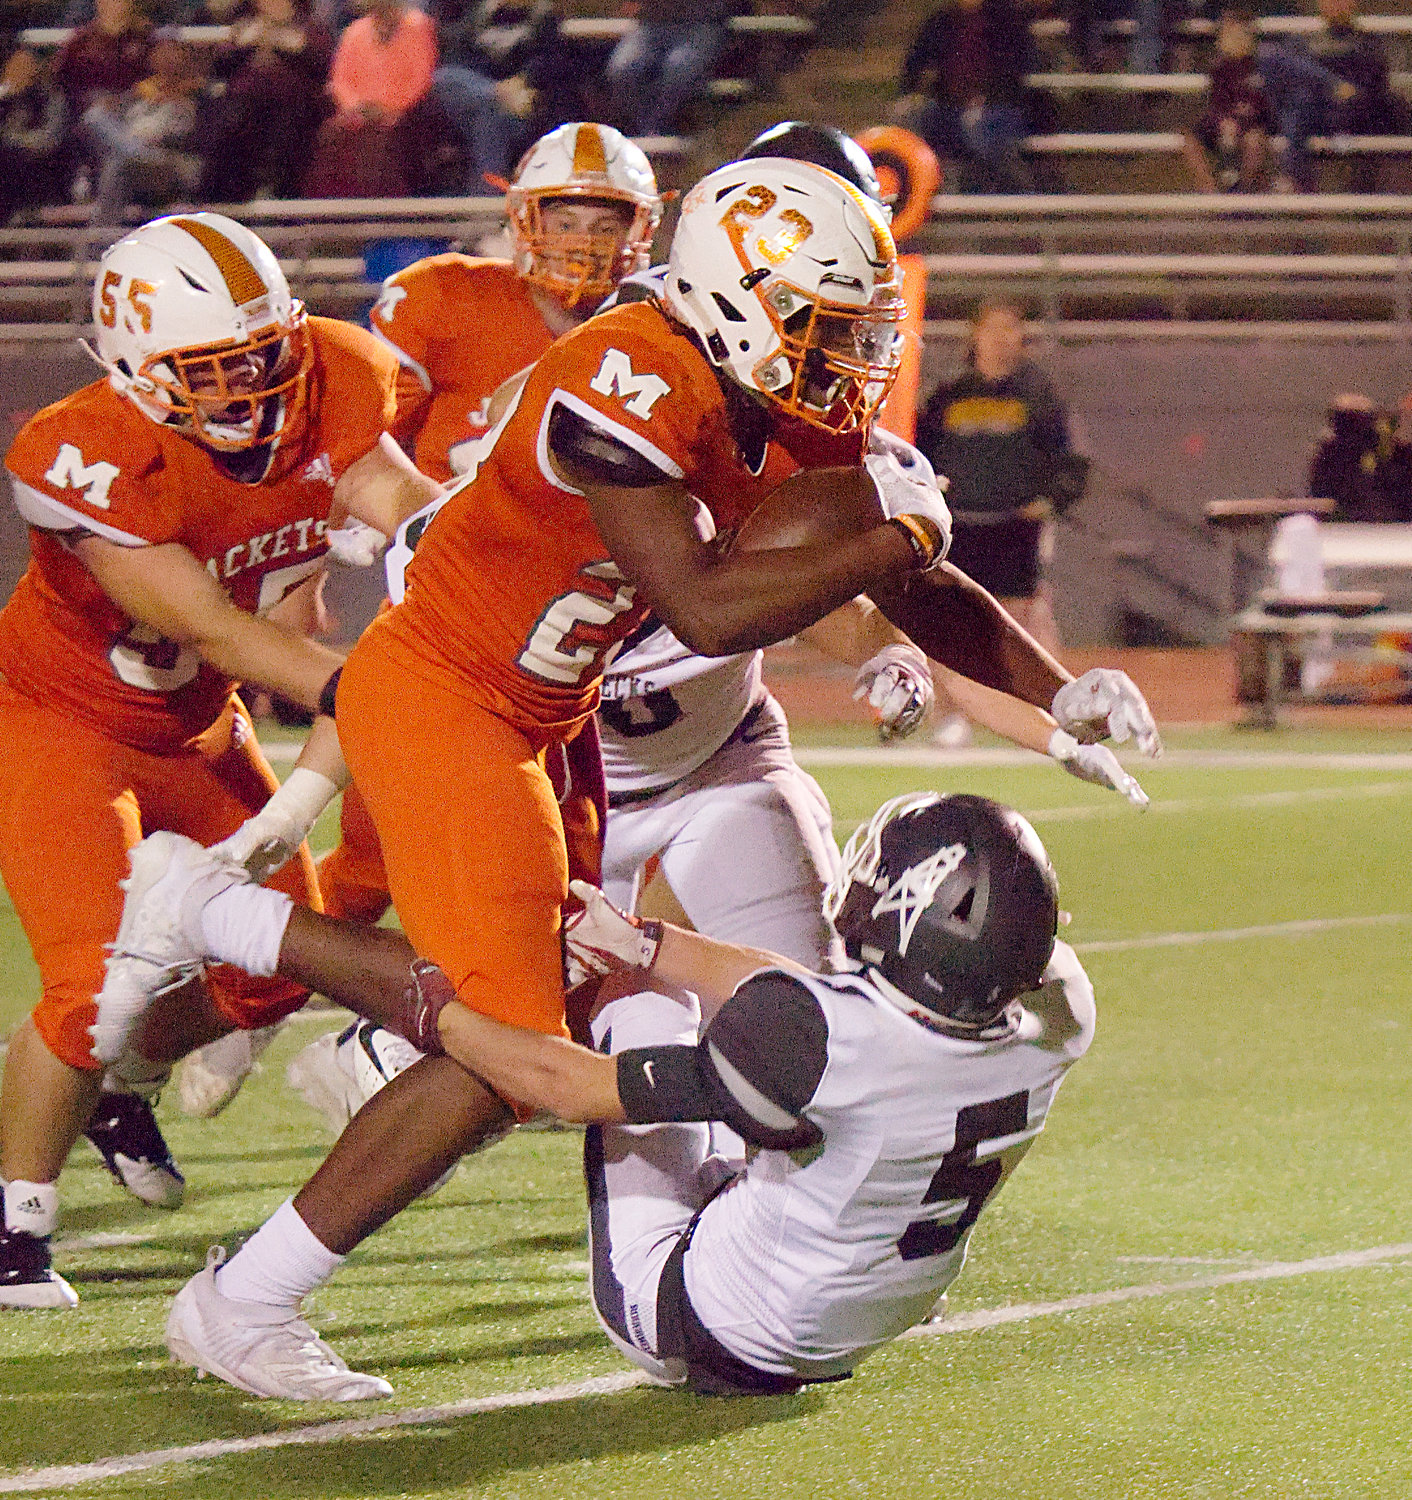 Sneed runs over a Roughneck defender against White Oak on Oct. 18, 2019 in Mineola.